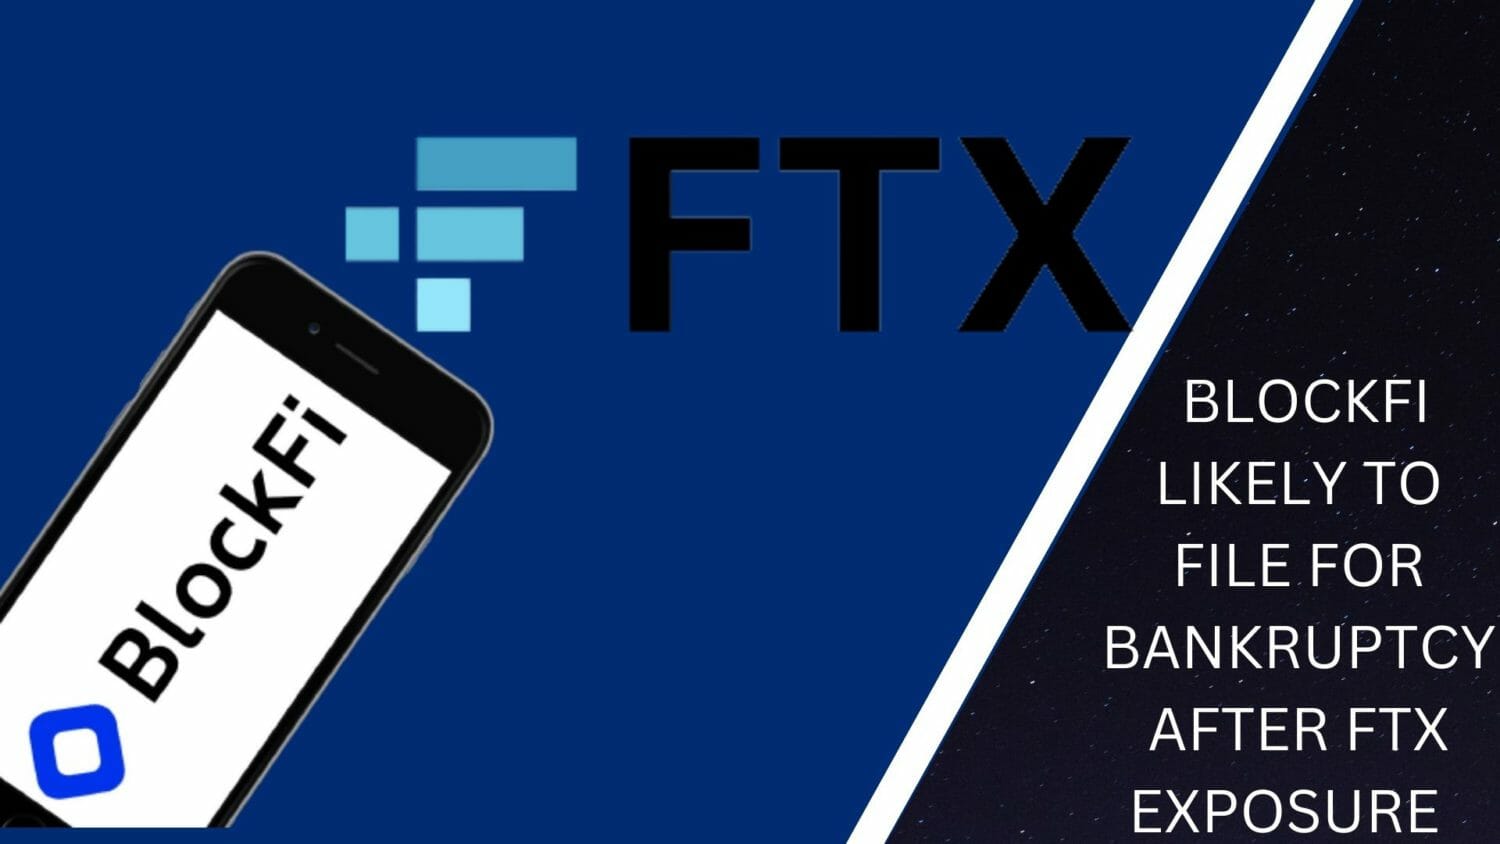 Blockfi Likely To File For Bankruptcy After Ftx Exposure